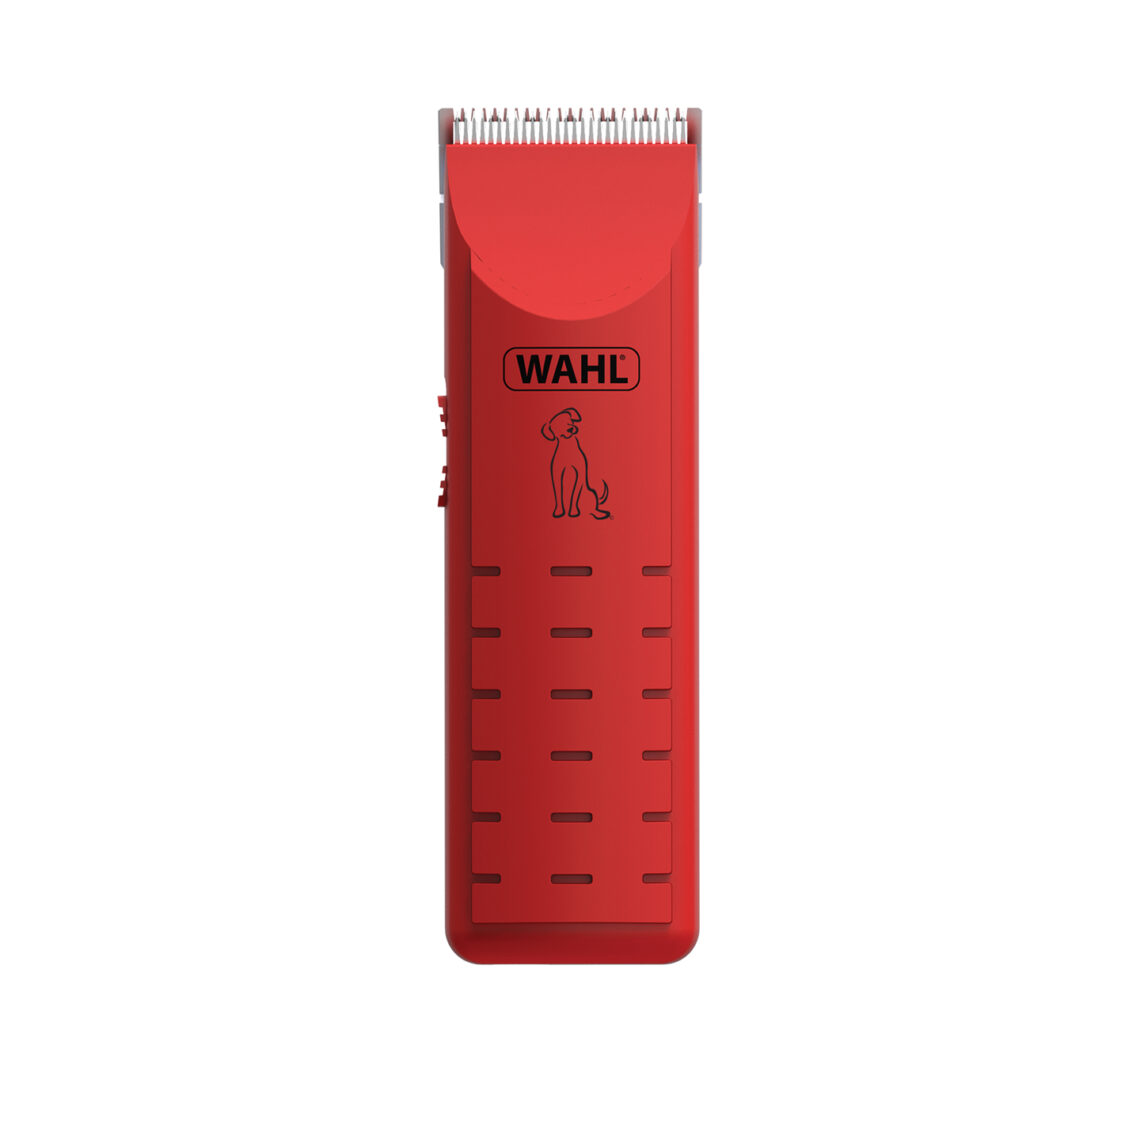 wahl pro series pet clippers